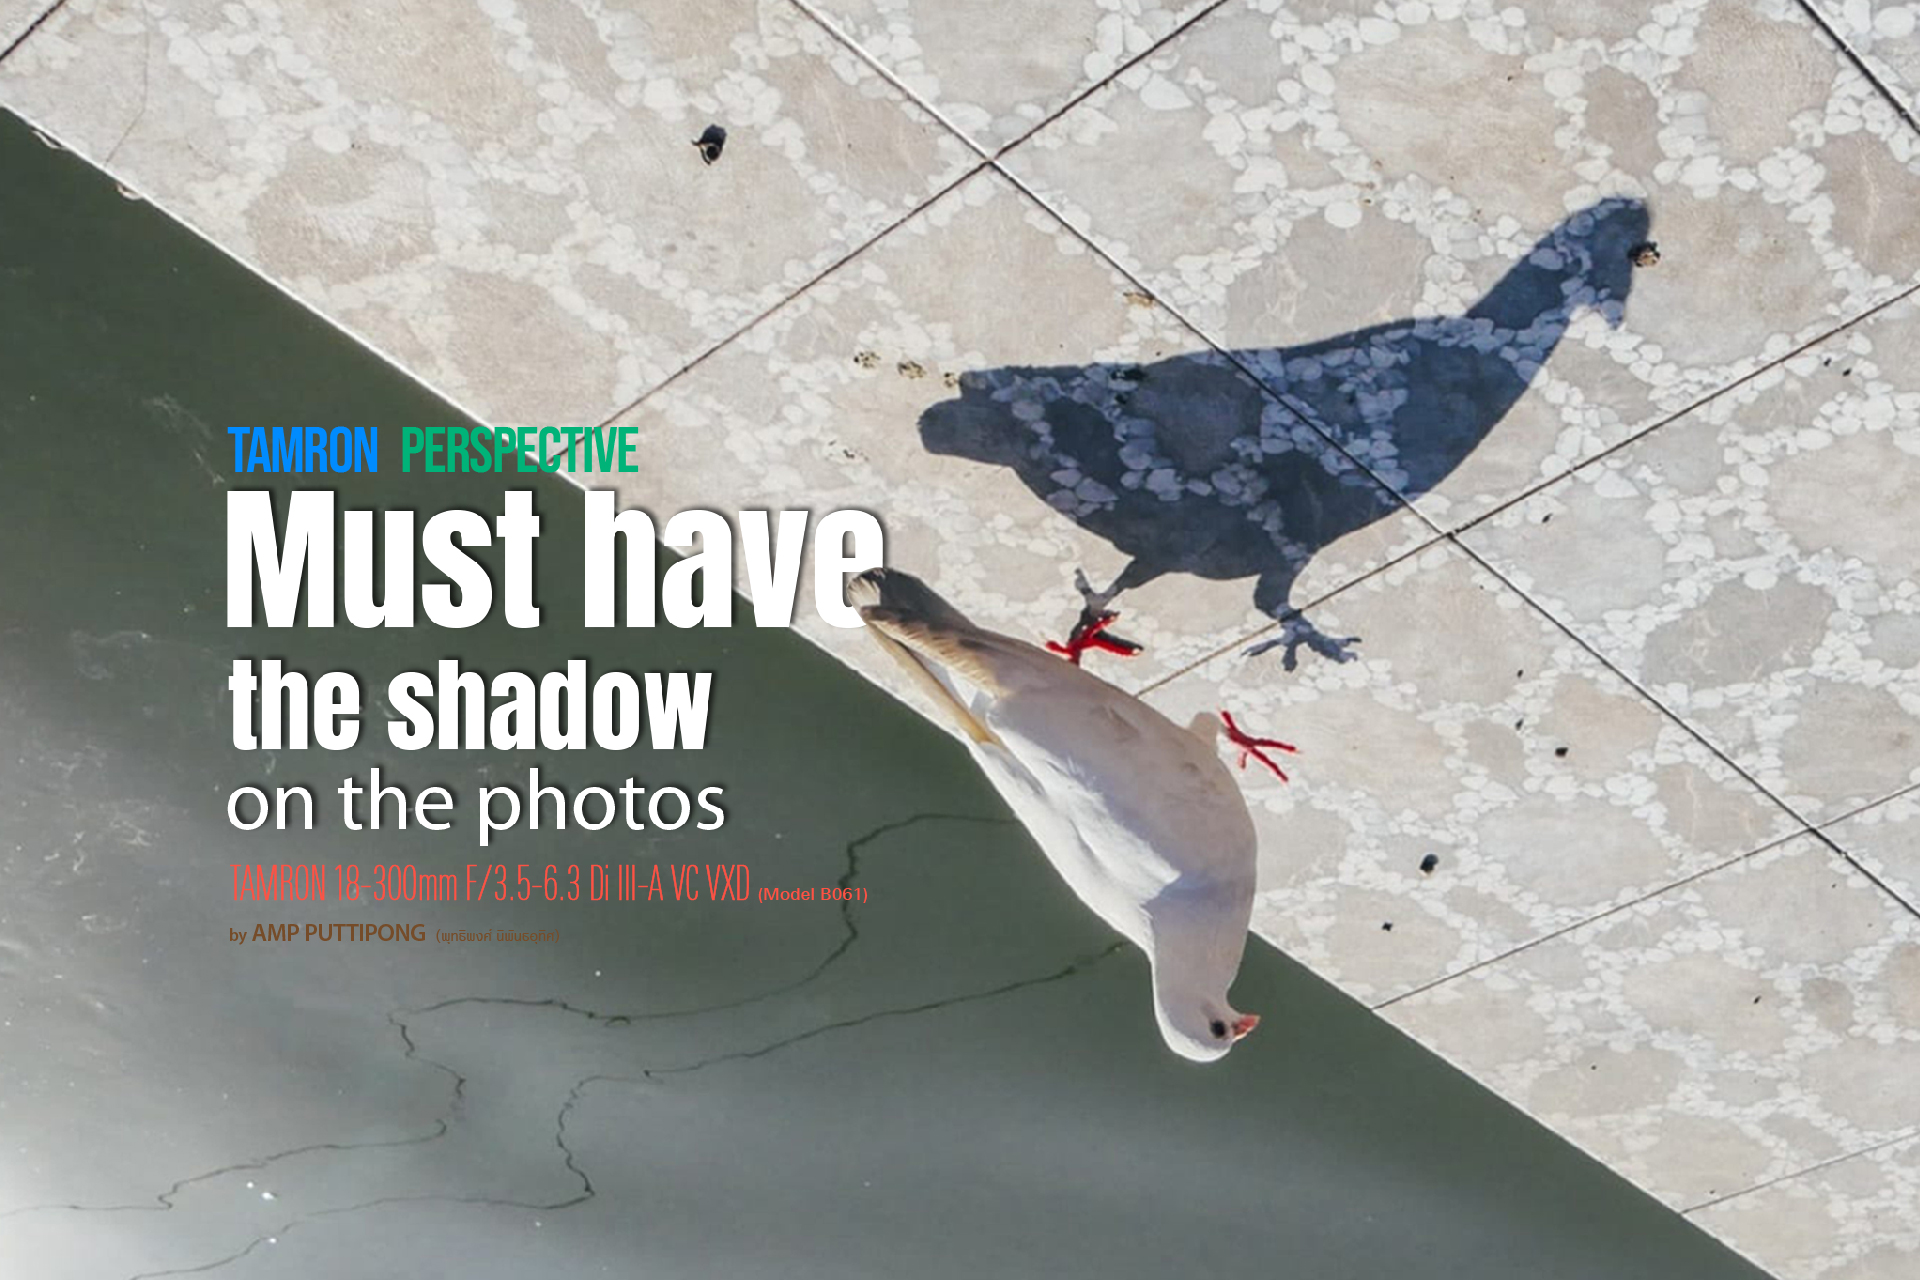 TAMRON PERSPECTIVE : MUST HAVE THE SHADOW ON THE PHOTOS